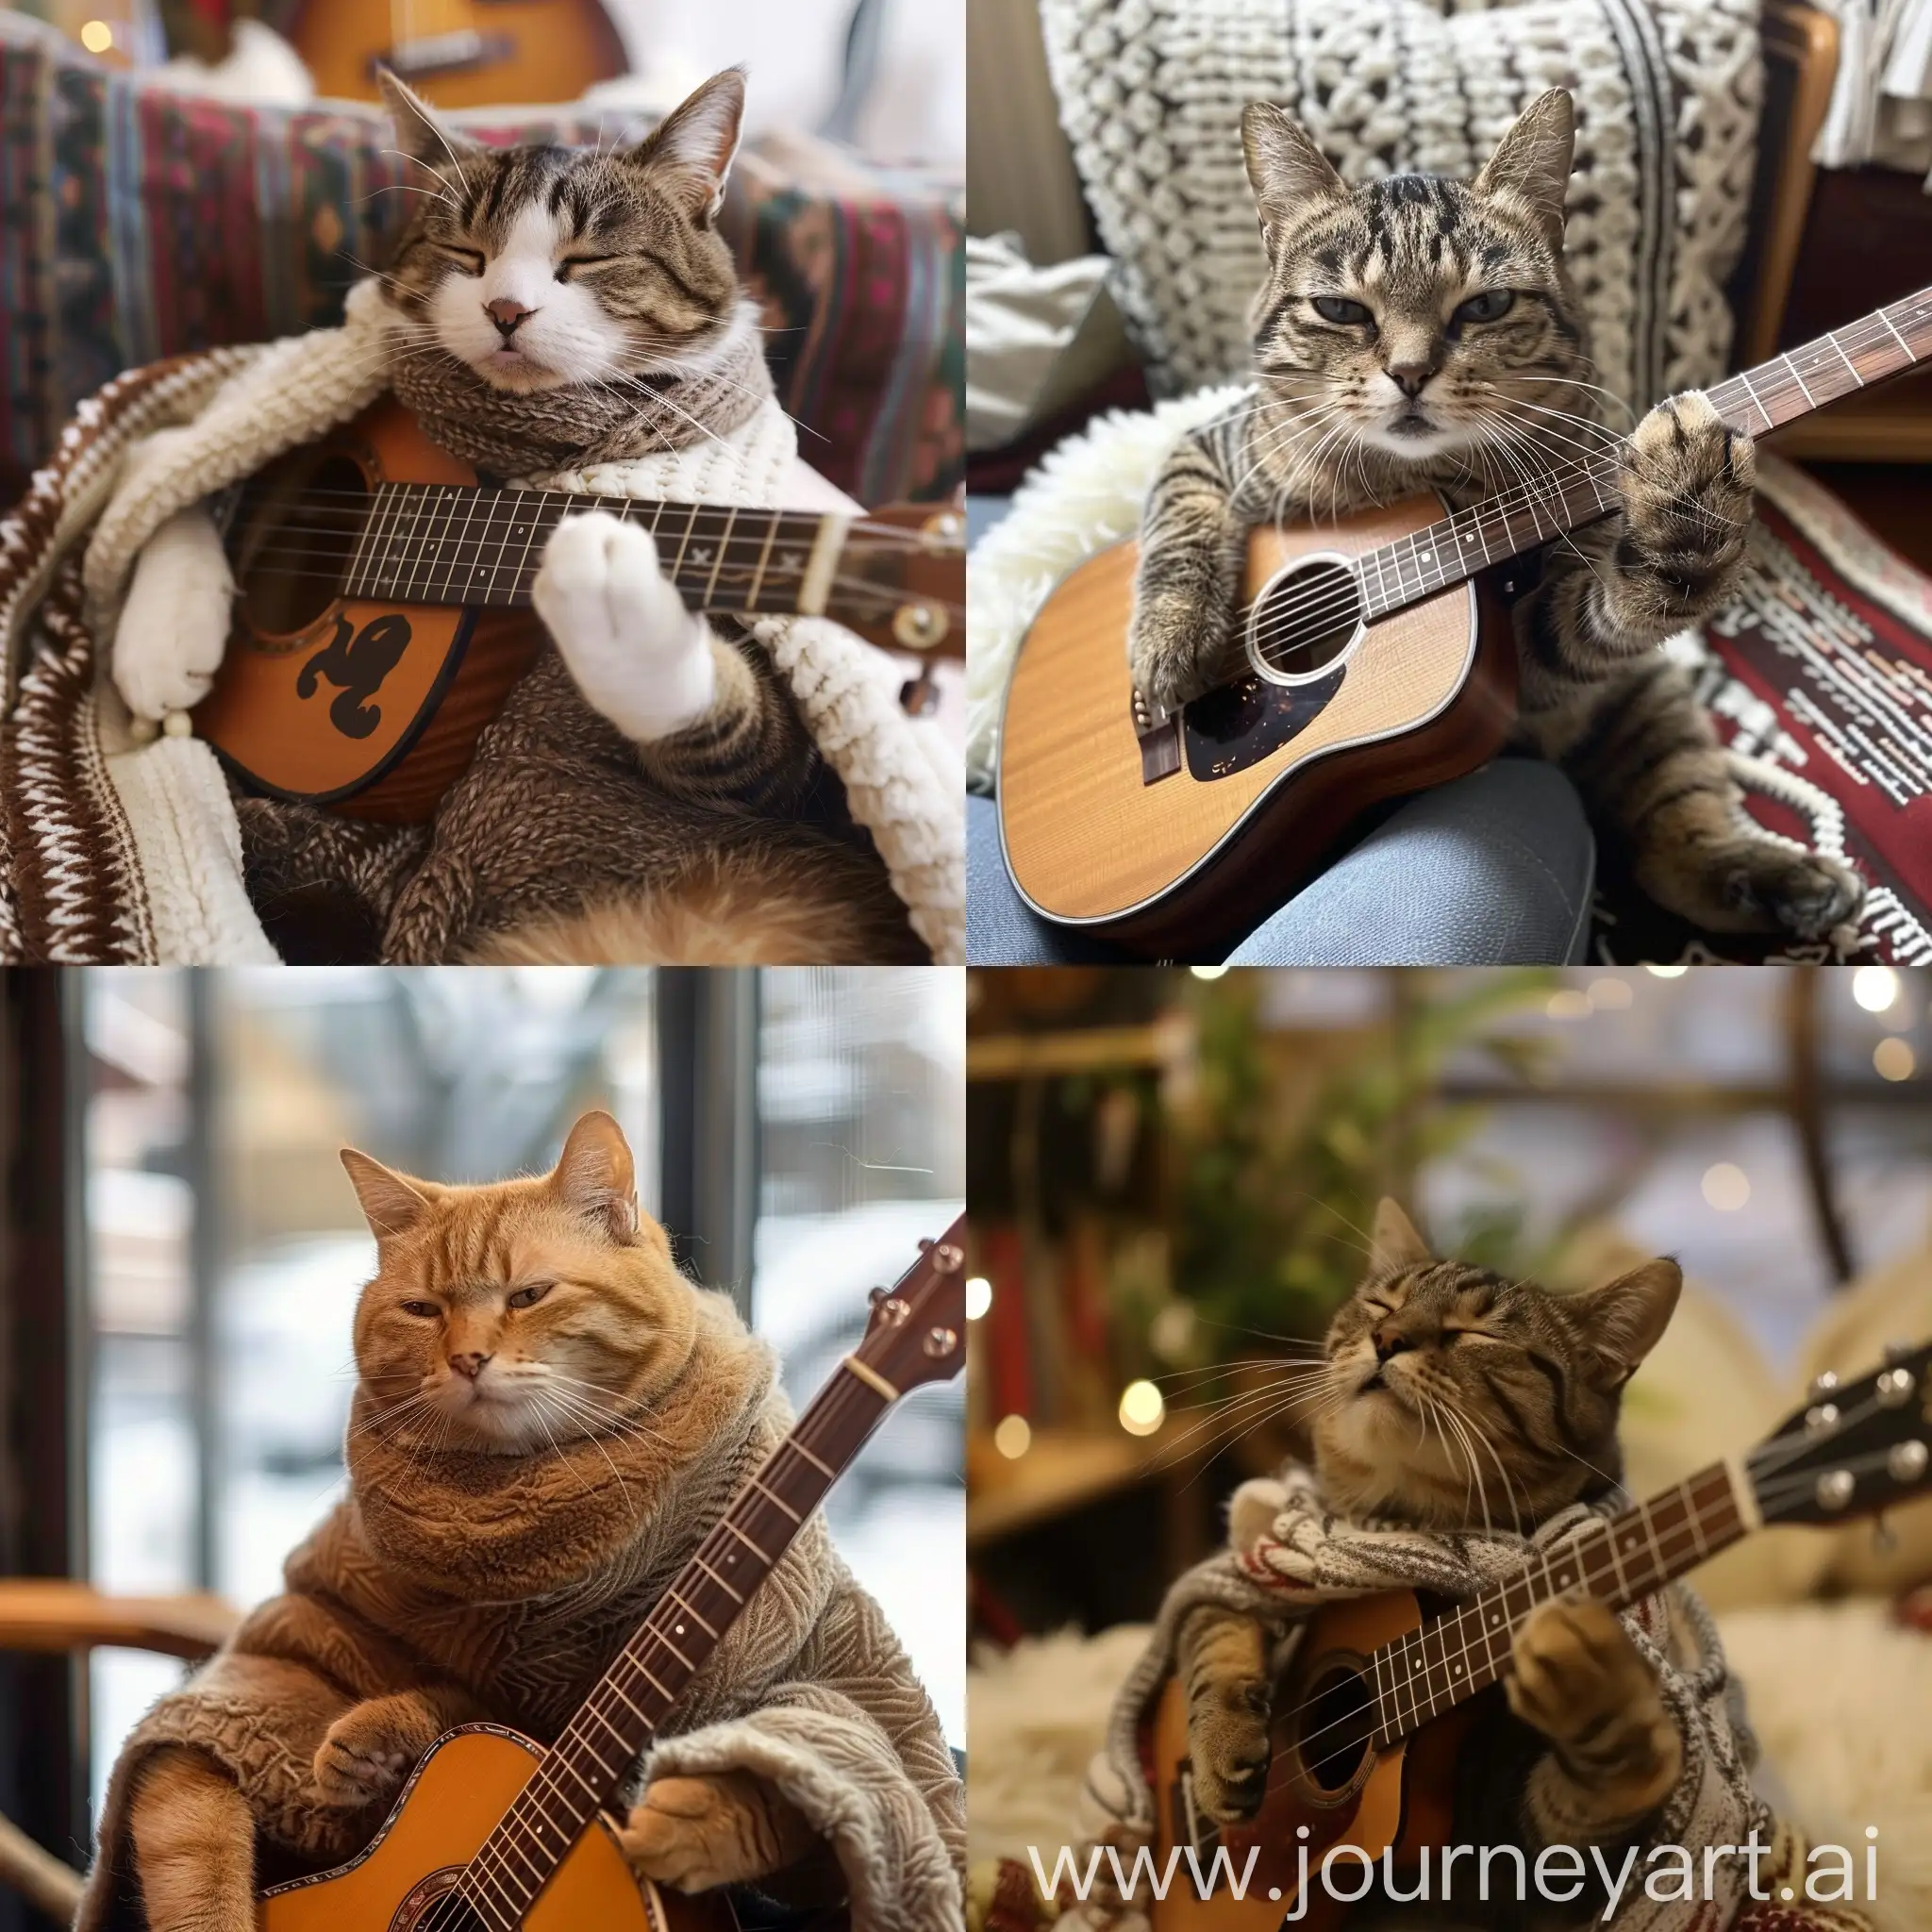 Cute-Cat-Playing-Guitar-with-Joyful-Expression